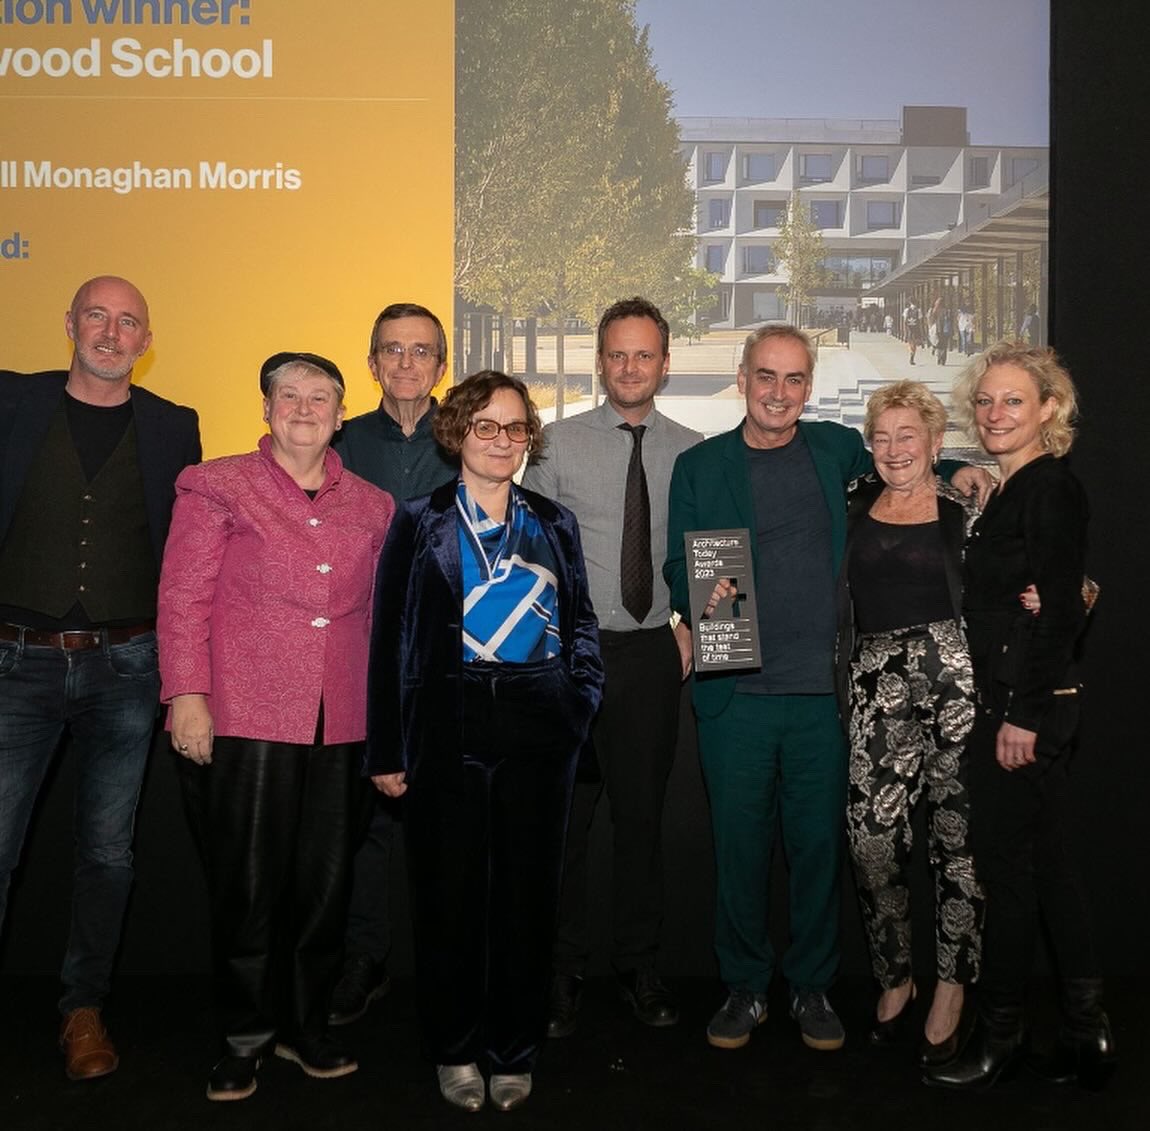 Hugely proud to achieve another award. Our buildings & teaching facilities allow us to teach in high quality specialist spaces, they raise aspiration for our young people, encourage them to interact & learn both outside & inside the buildings & are key to us delivering. #ATAwards